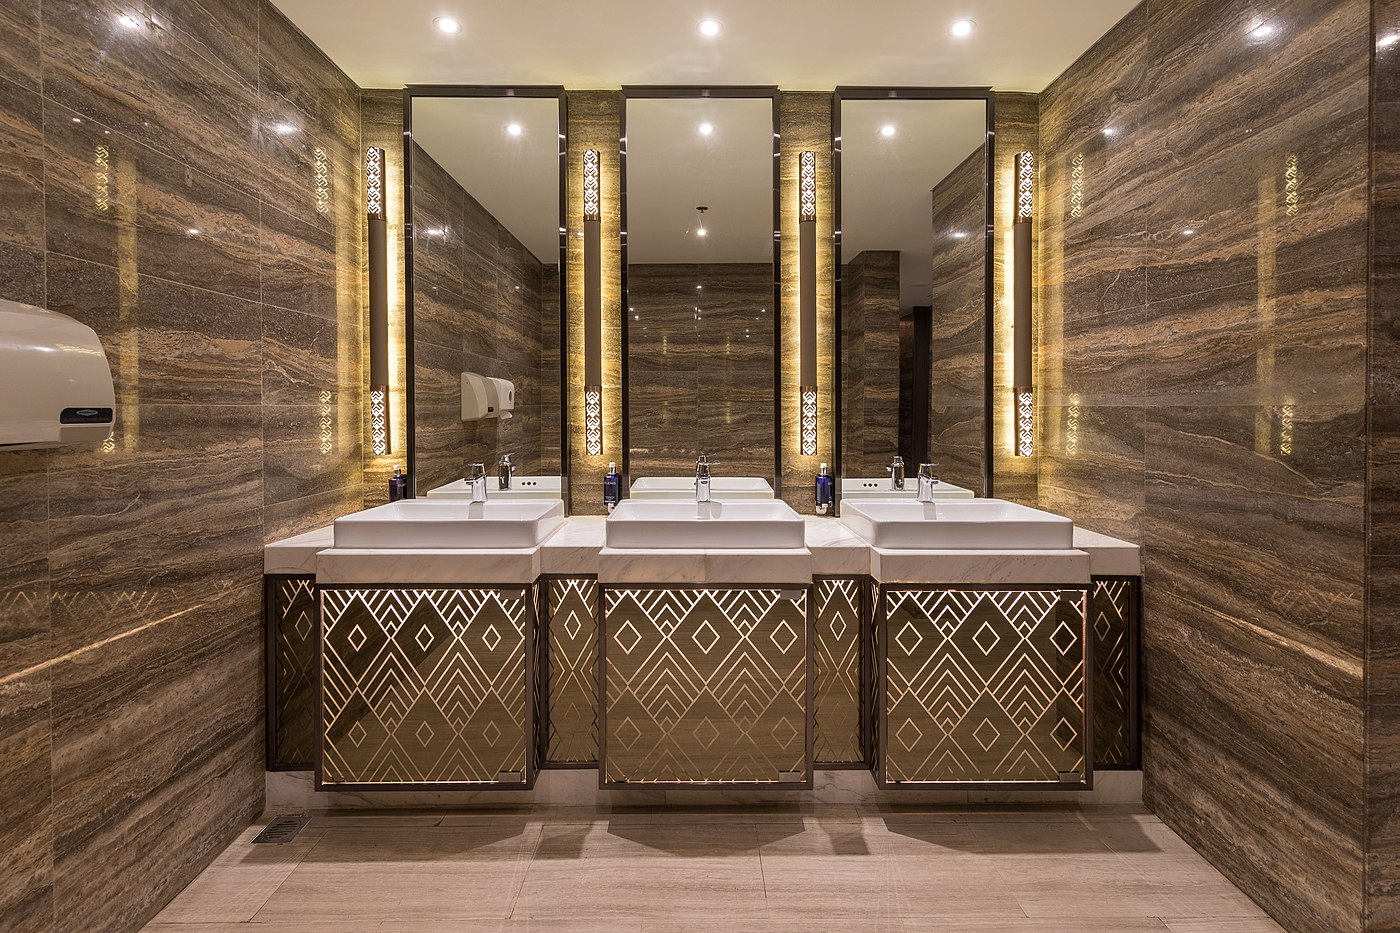 The sinks of the restrooms in Crowne Plaza hotel of Vientiane, Laos